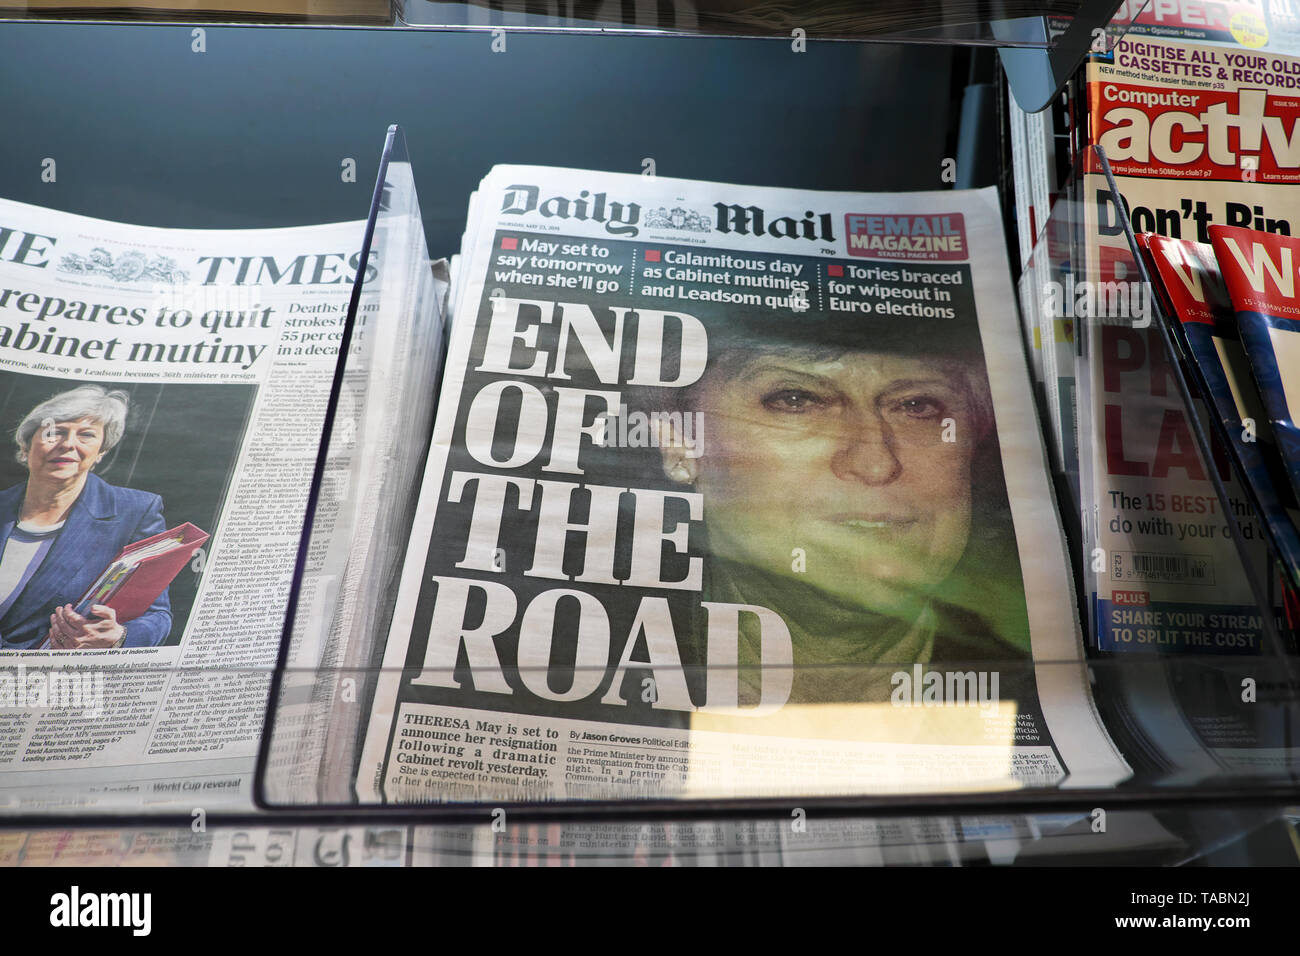 Daily Mail newspaper headline front page 'END OF THE ROAD' for PM Theresa May on a newsstand at a newsagents on 23 May 2019 in the buildup to a Conservative Tory leadership contest in Westminster London England UK Stock Photo